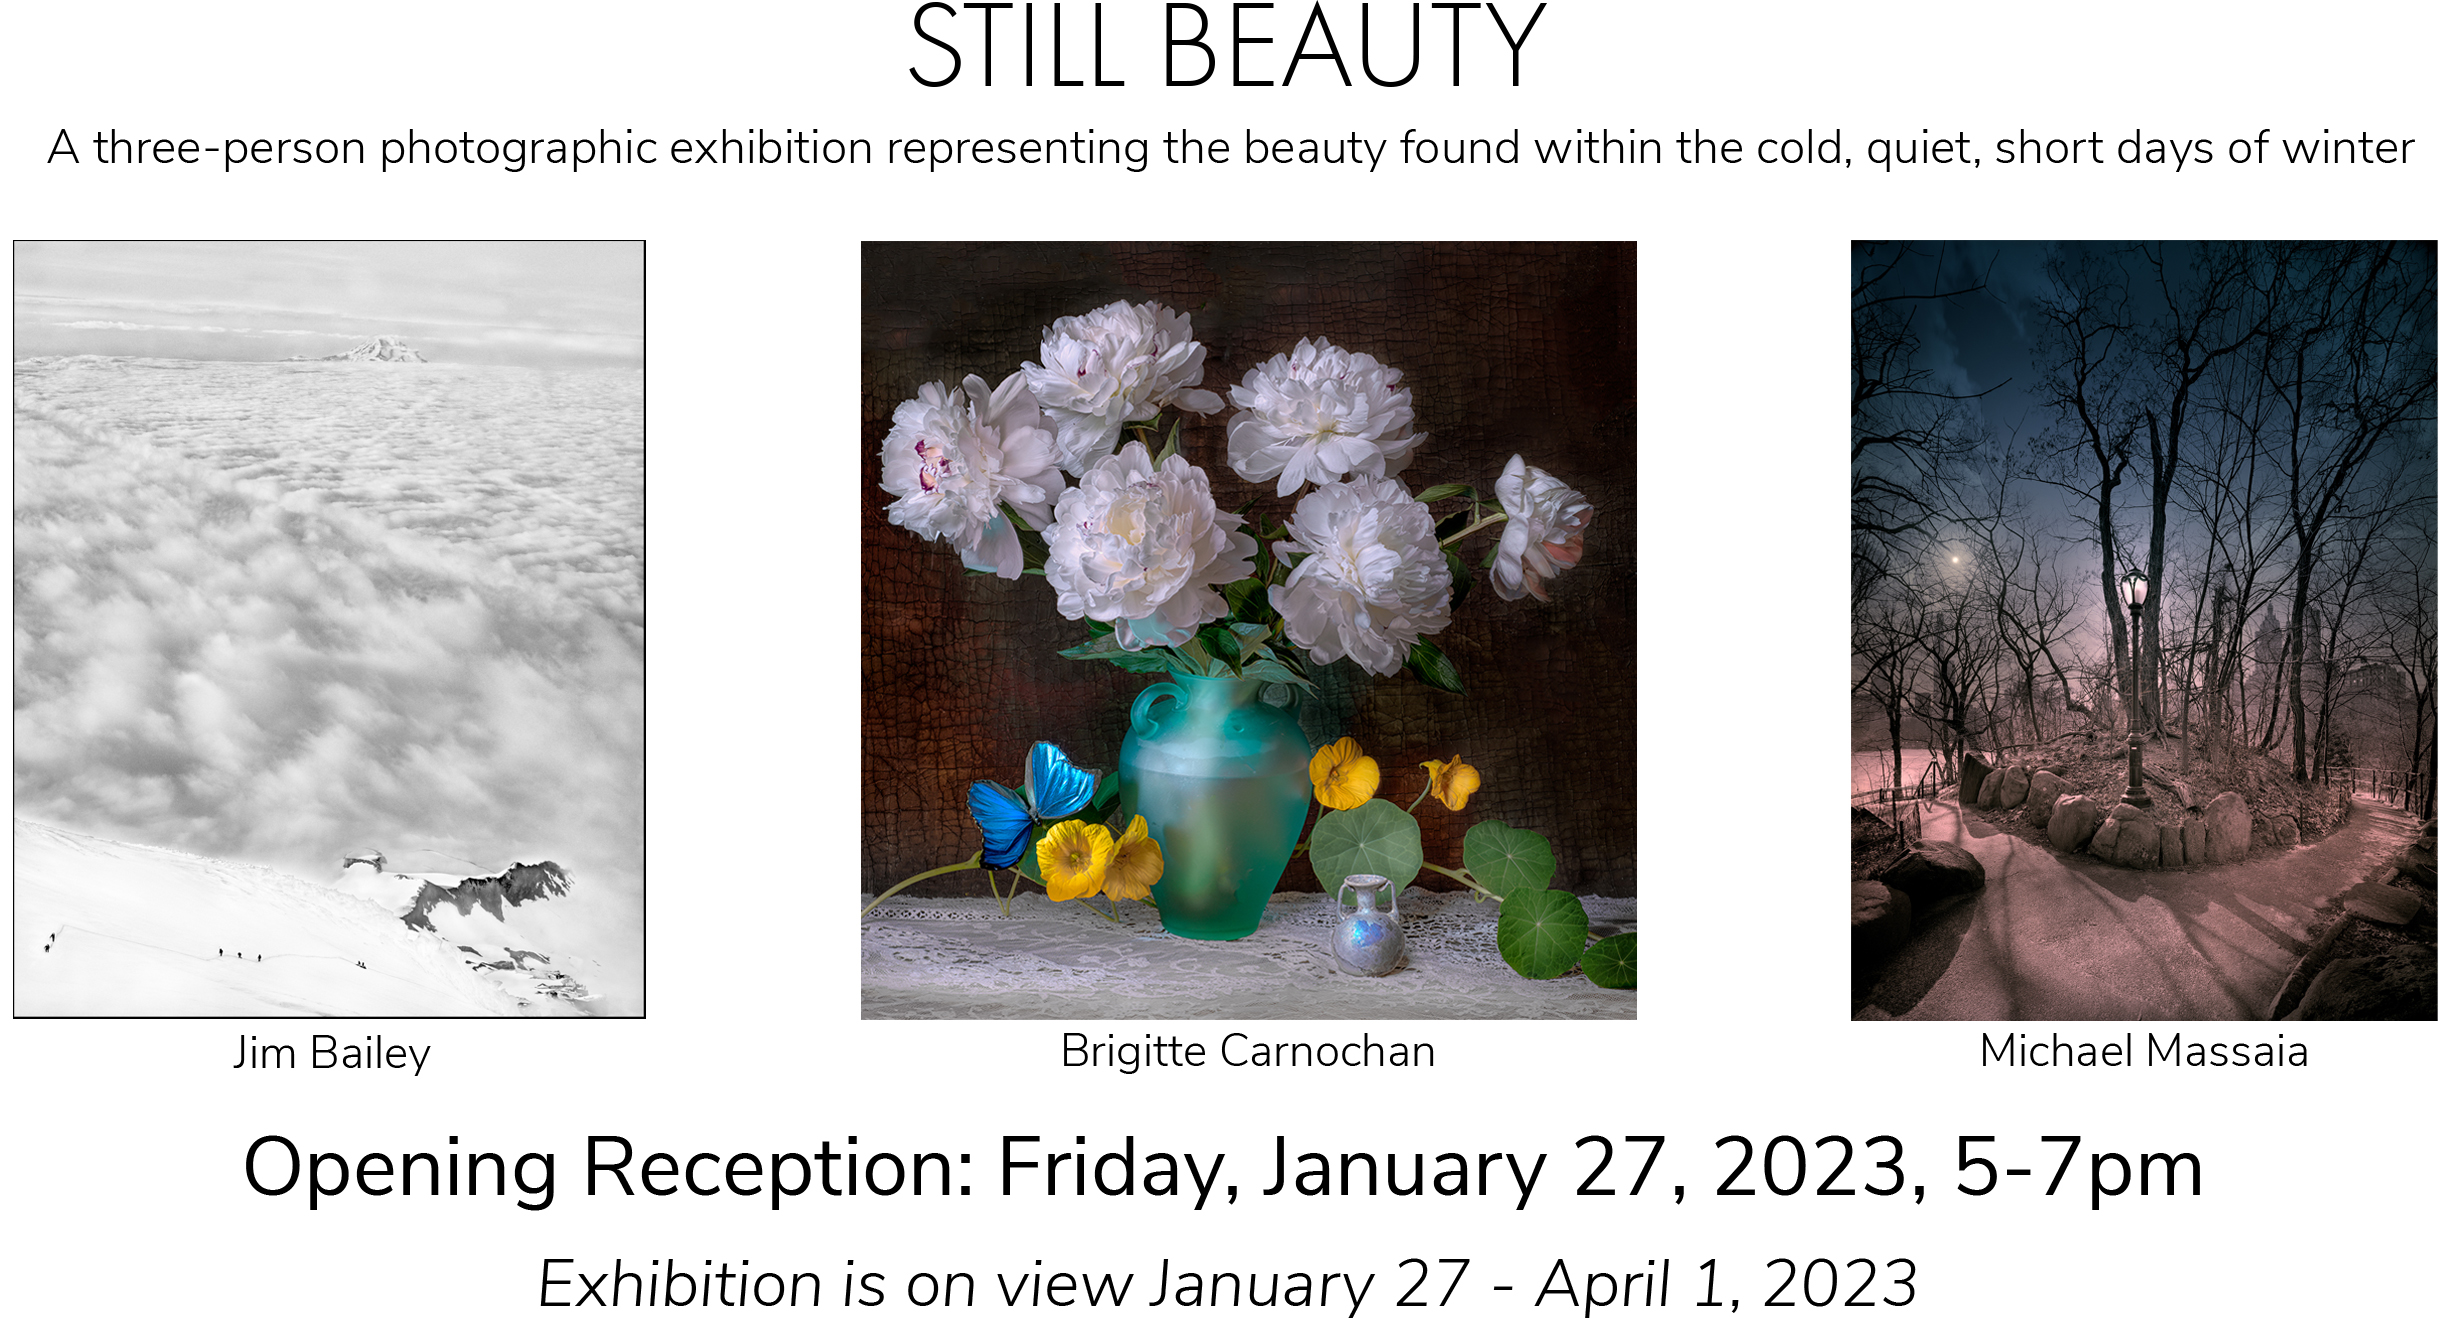 Still Beauty is a three-person photographic exhibition representing the beauty found within the cold, quiet, short days of winter